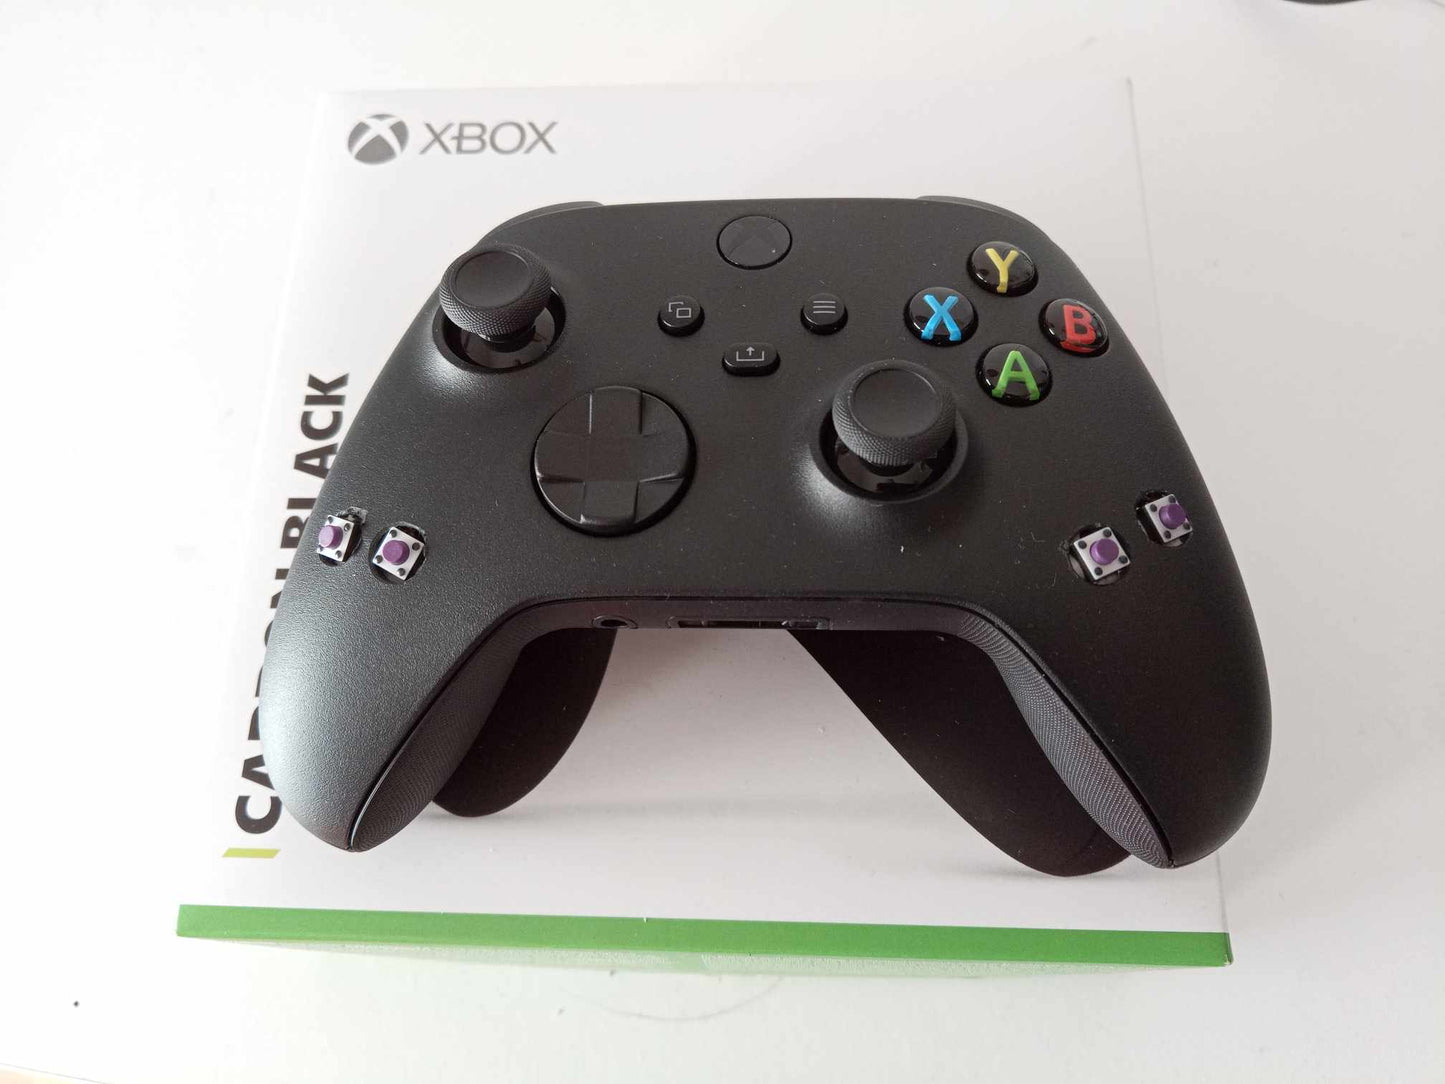 XBOX One S/X controller with triggers on it